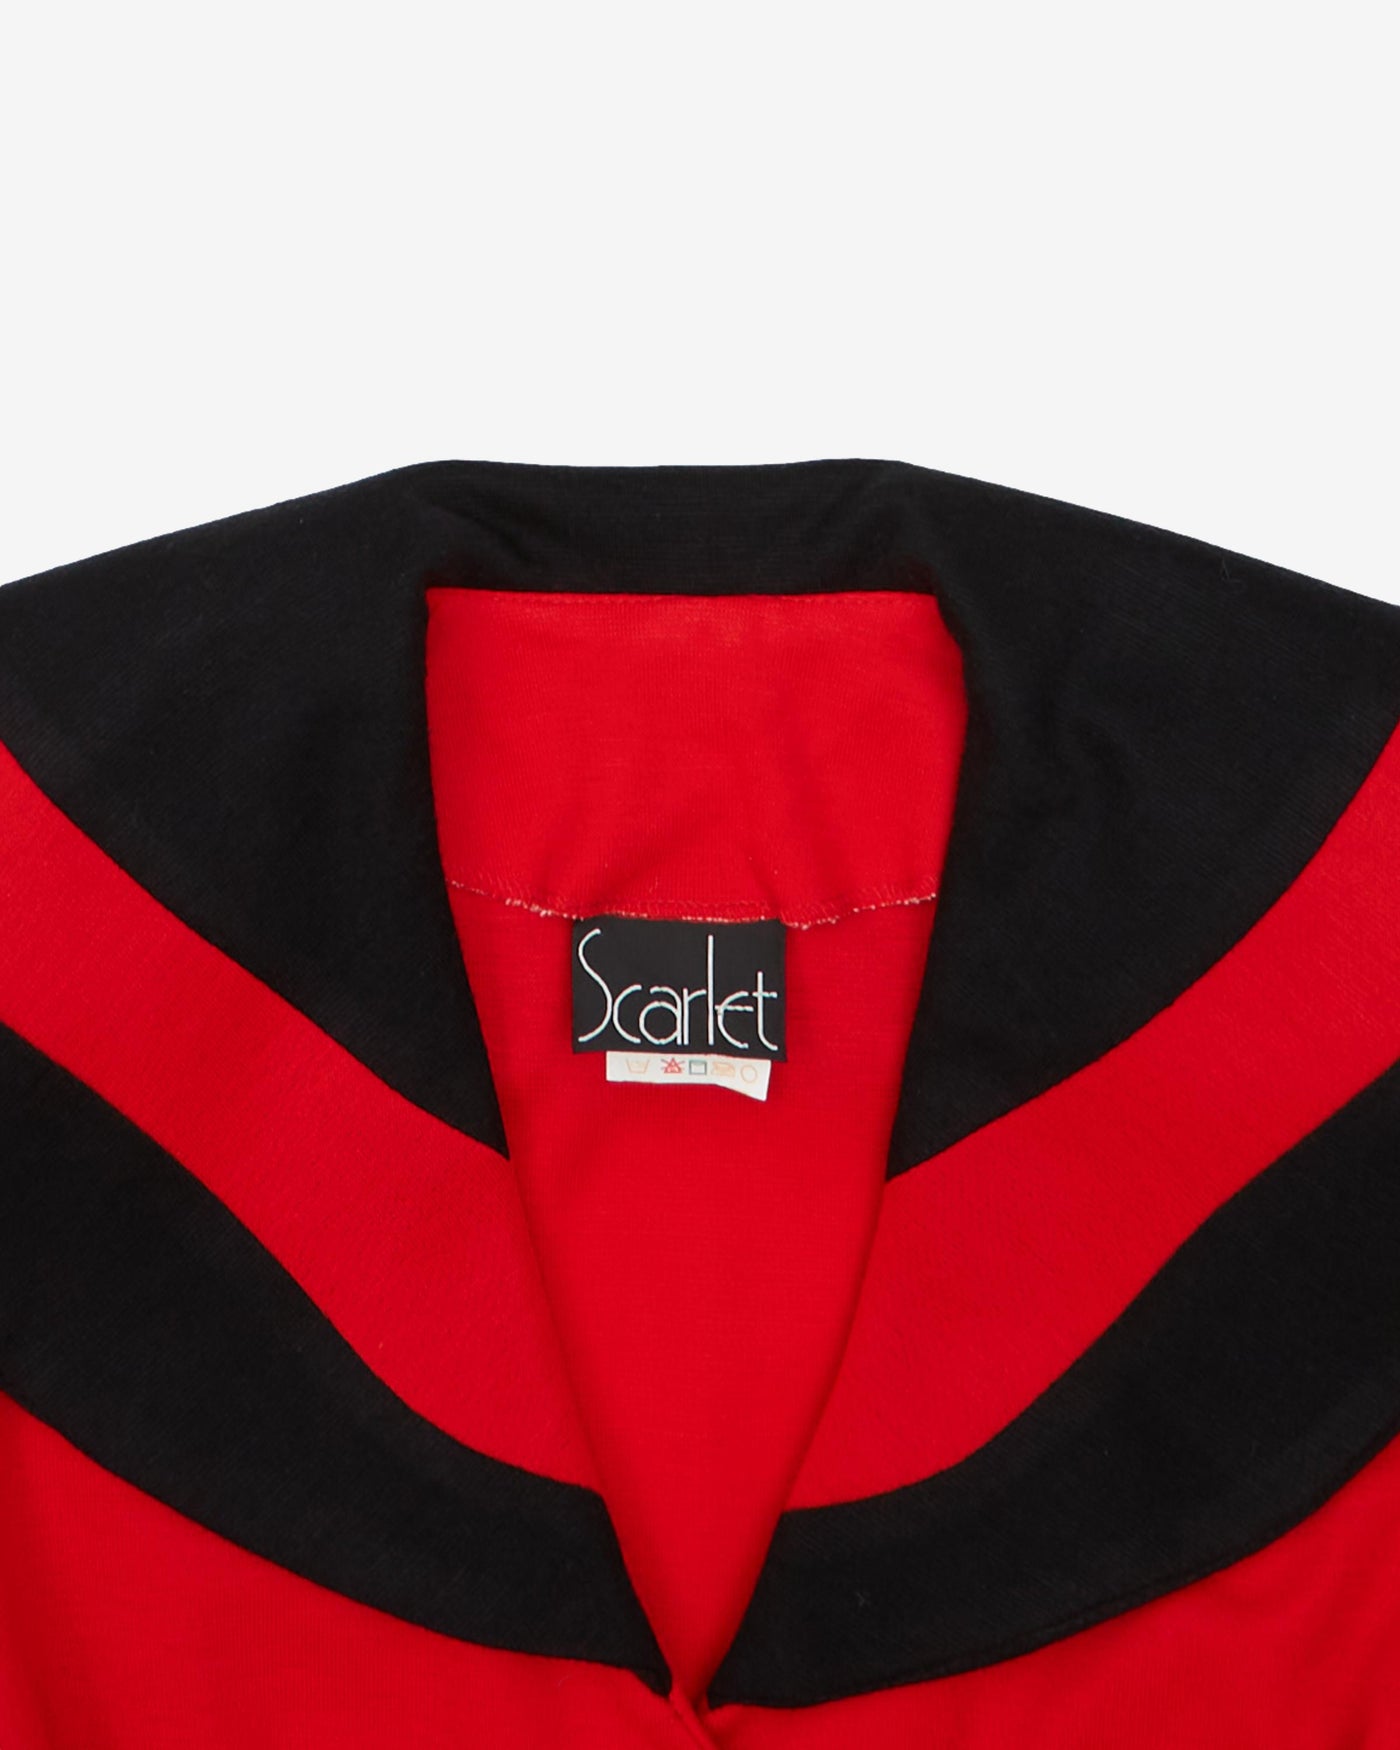 1990s Red And Black Style Blazer Jacket - S